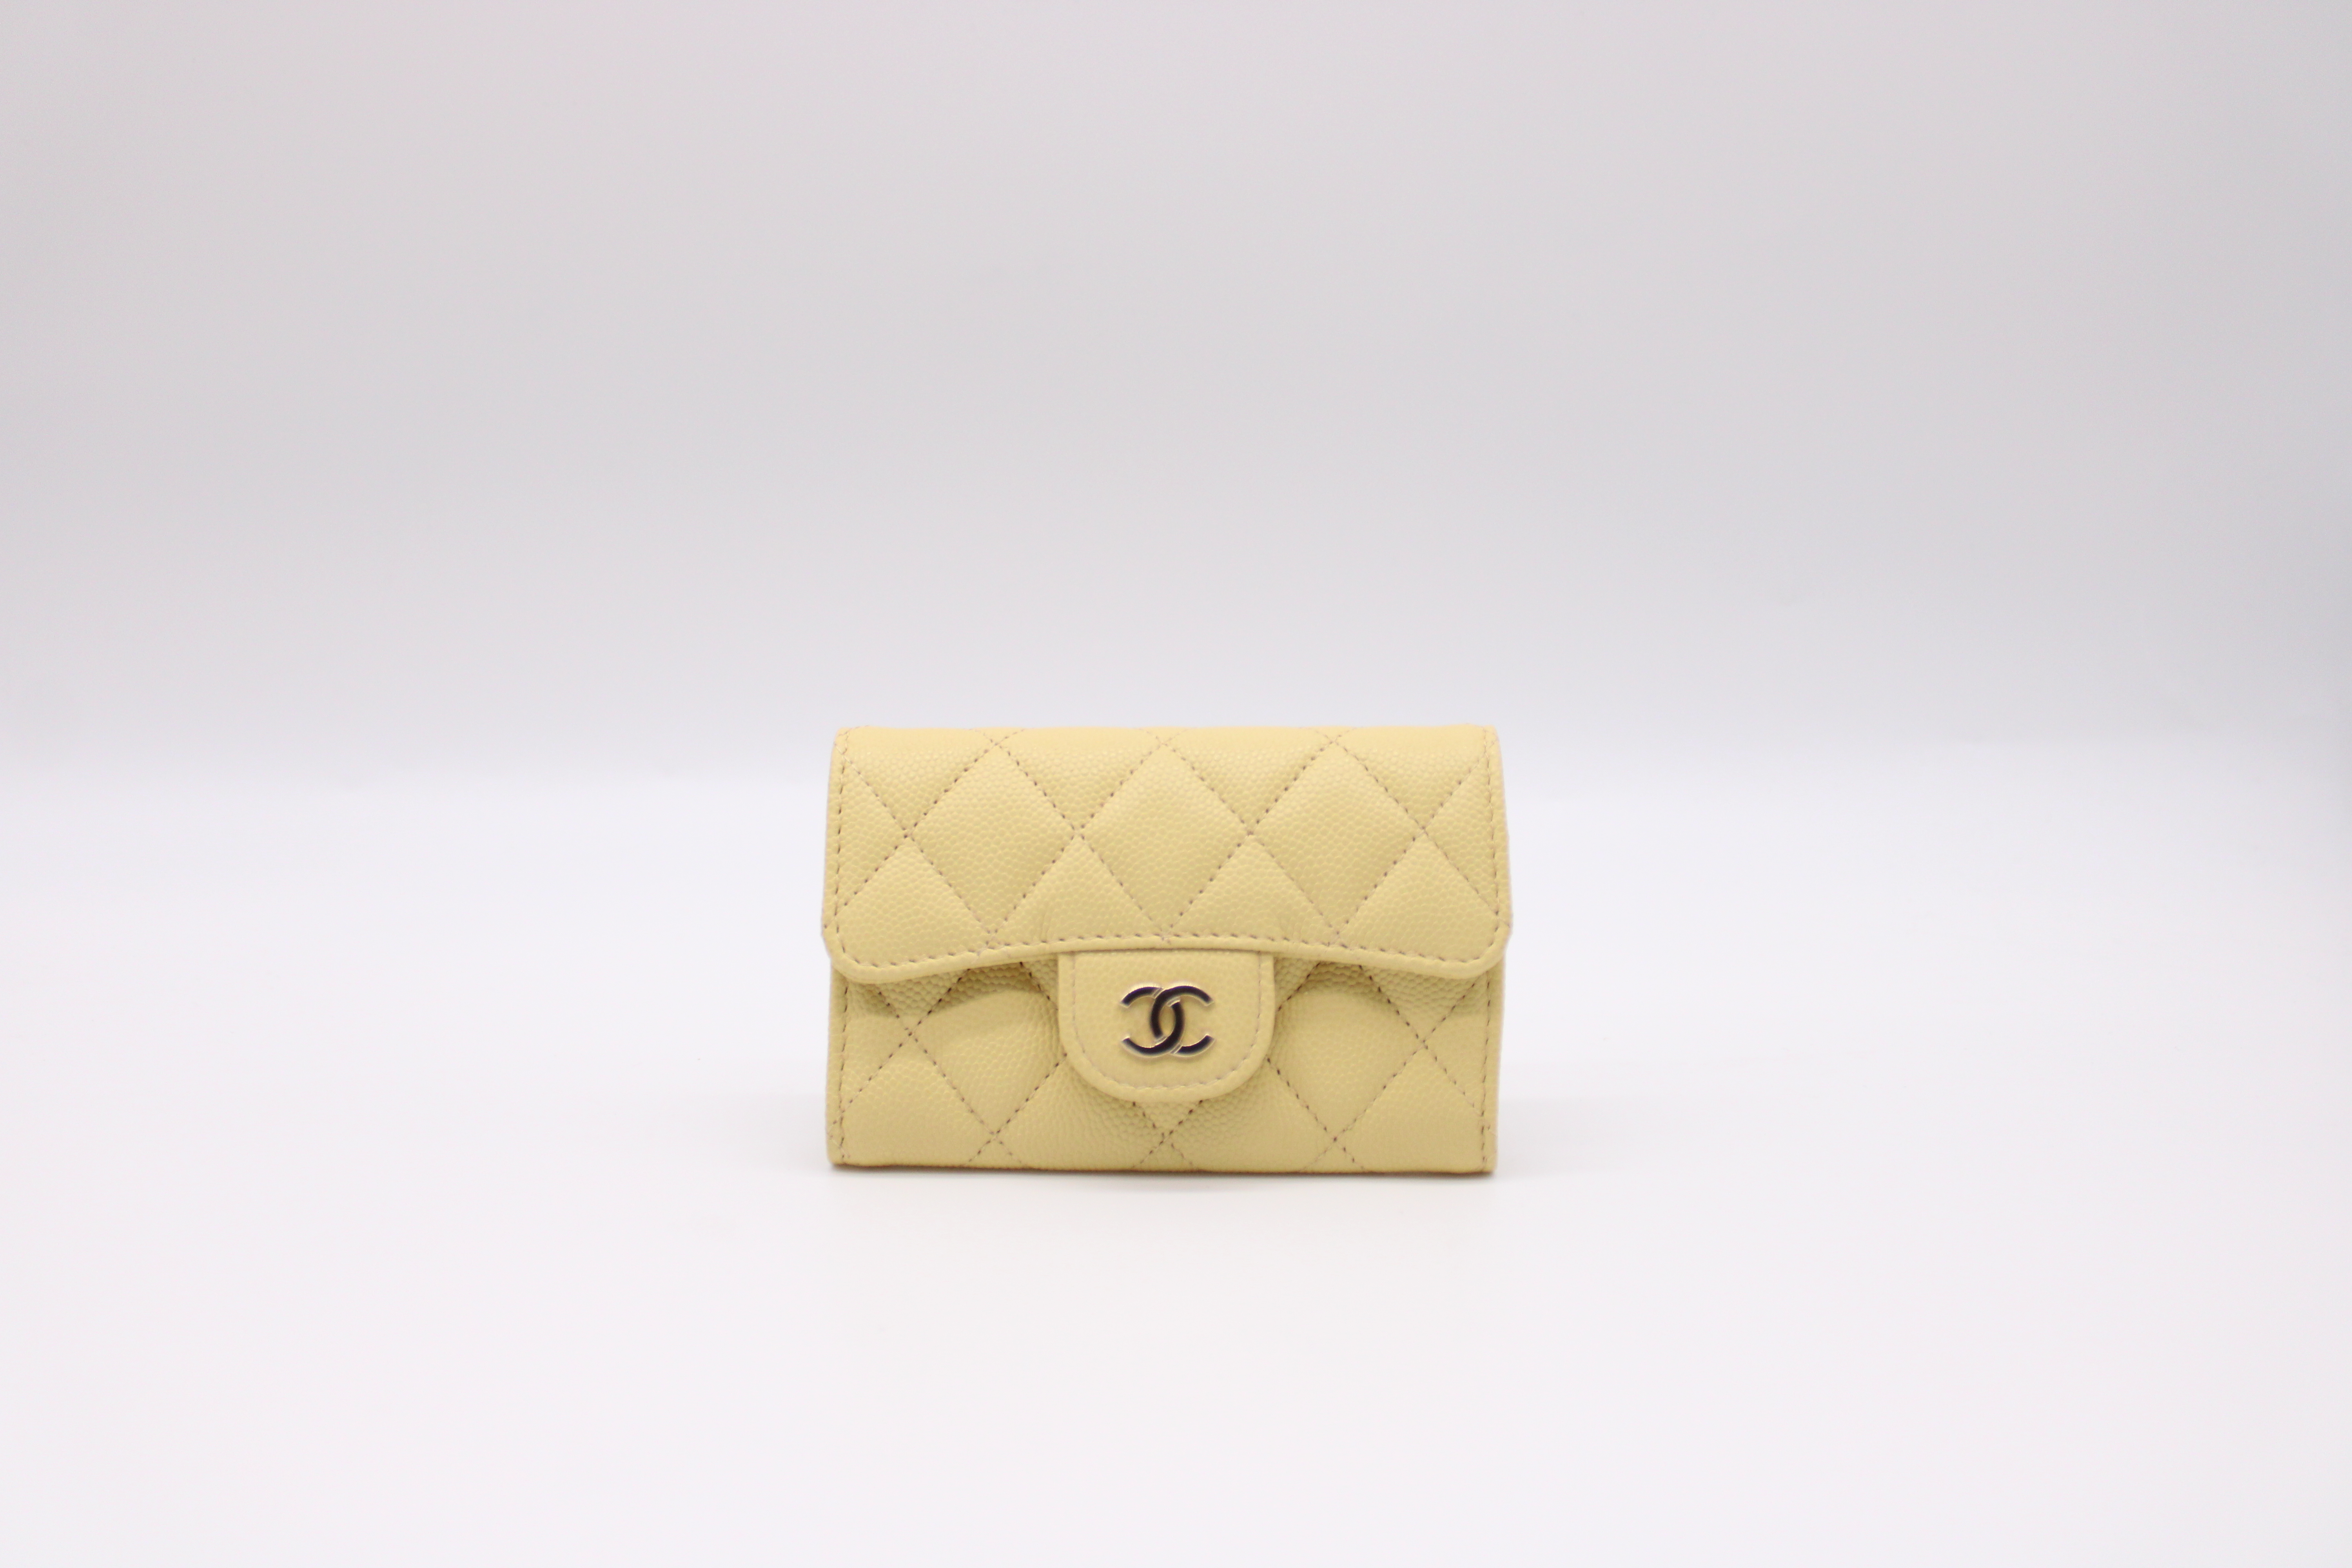 Chanel SLG Snap Cardholder, Yellow Caviar Leather, Gold Hardware